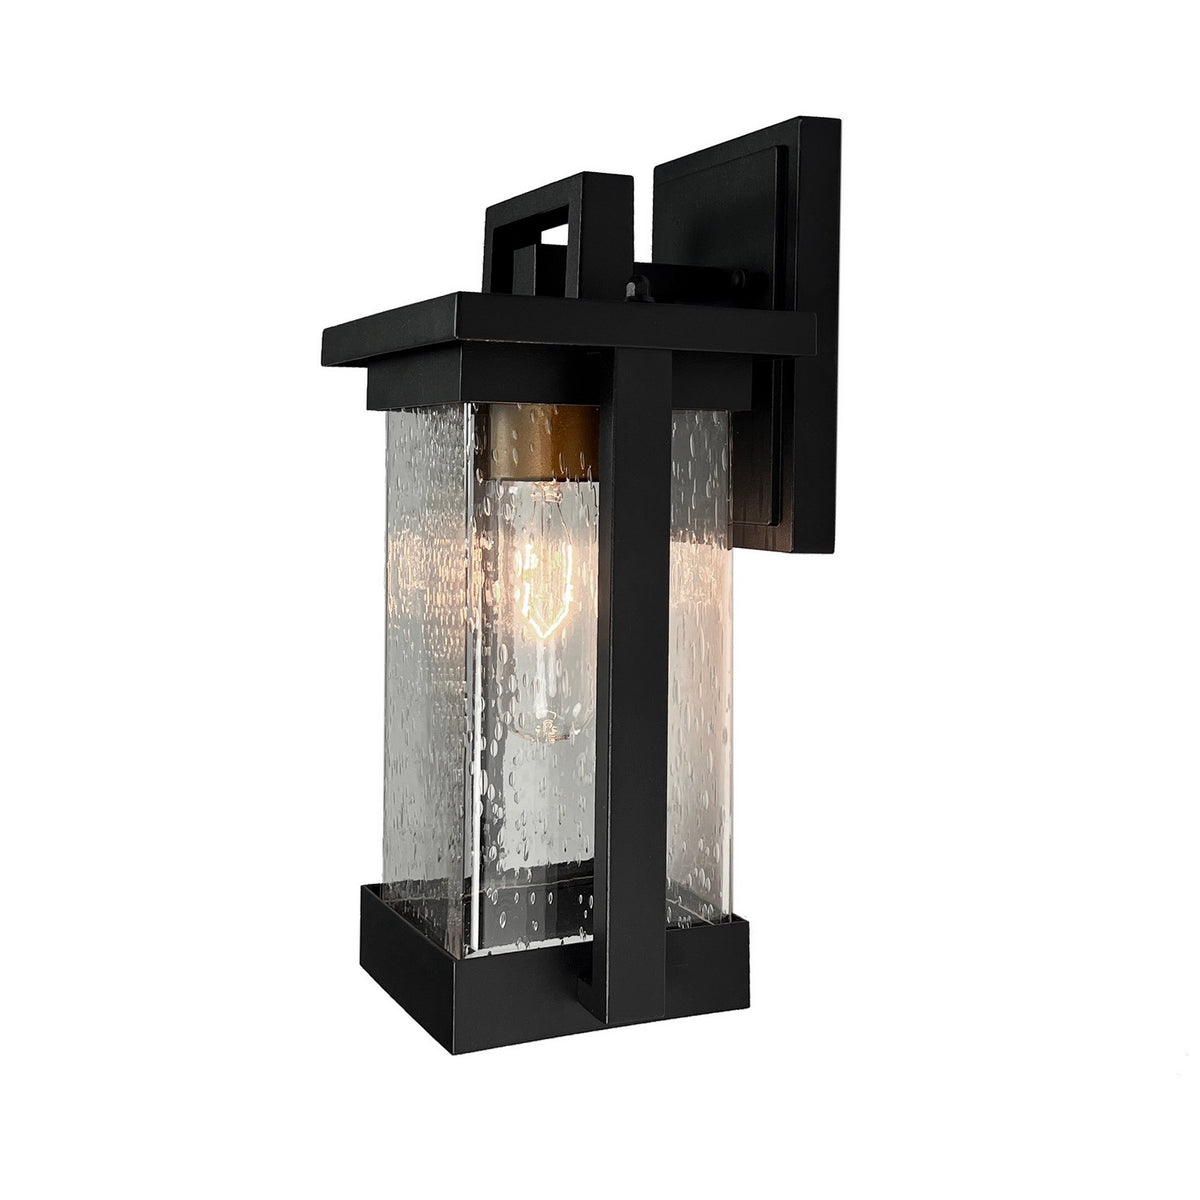 Artcraft Canada - AC8021BK - One Light Outdoor Wall Sconce - Port Charlotte Collection - Matte Black